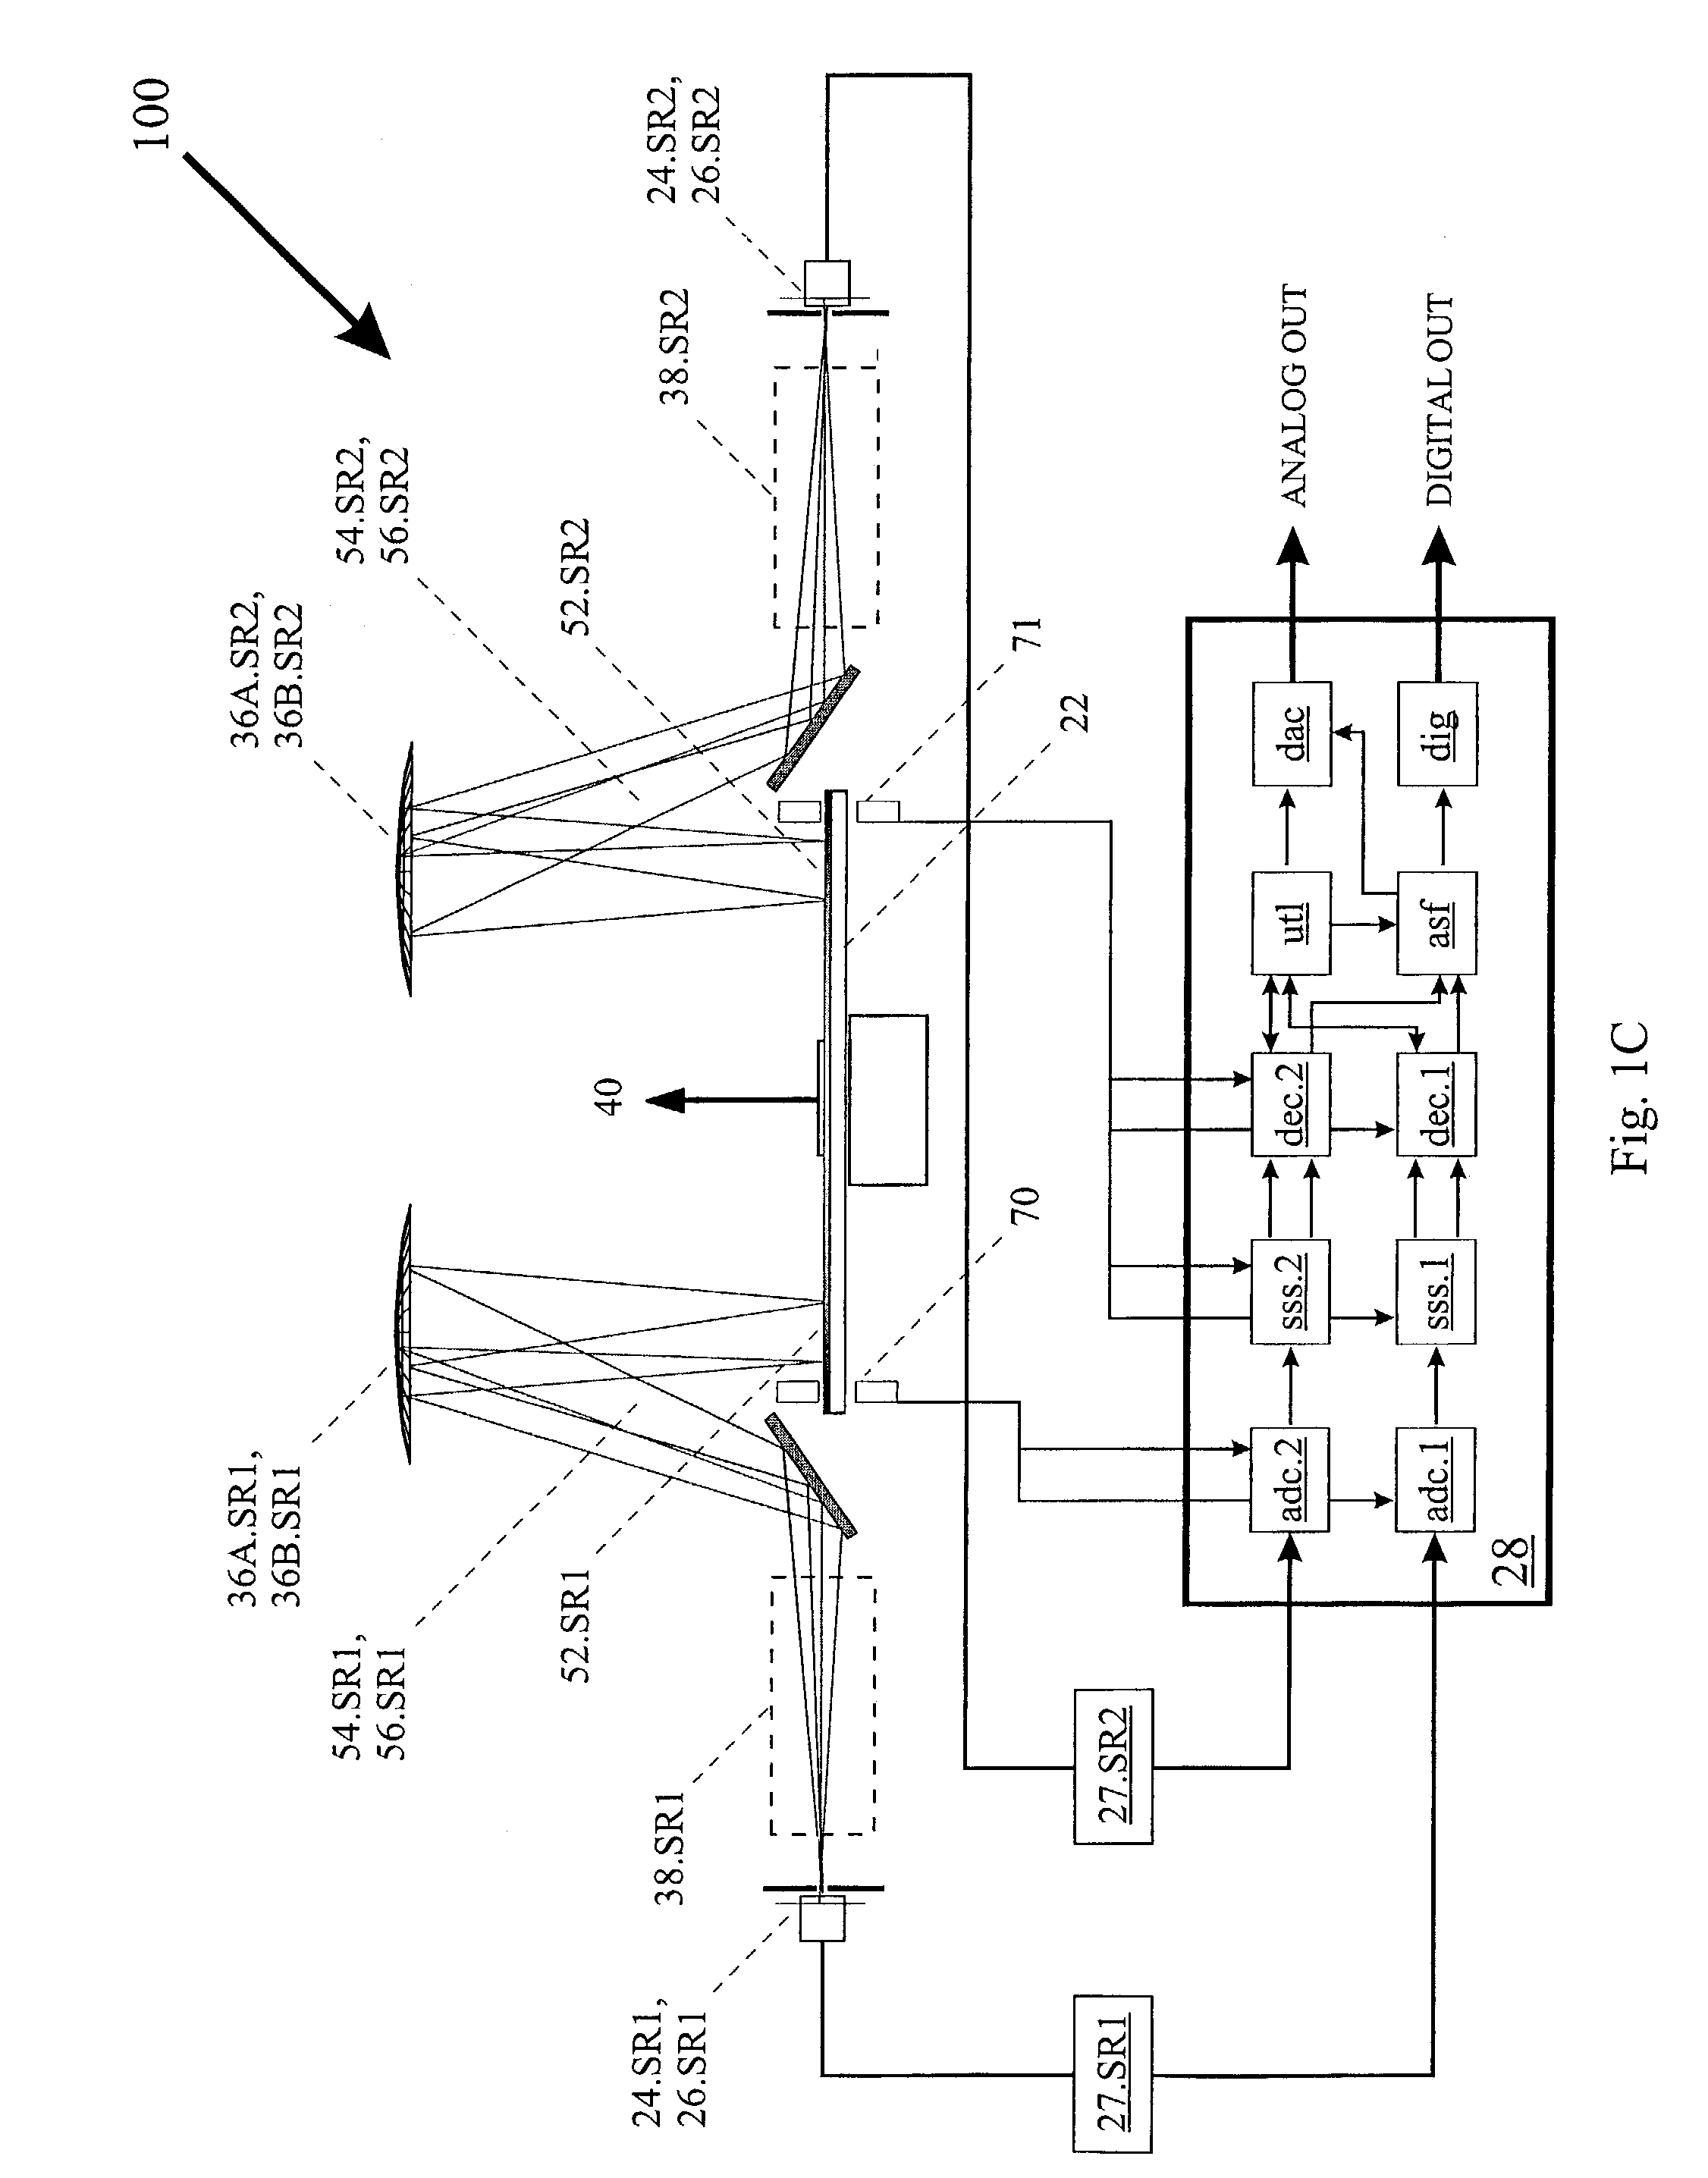 Method and apparatus for radiation encoding and analysis